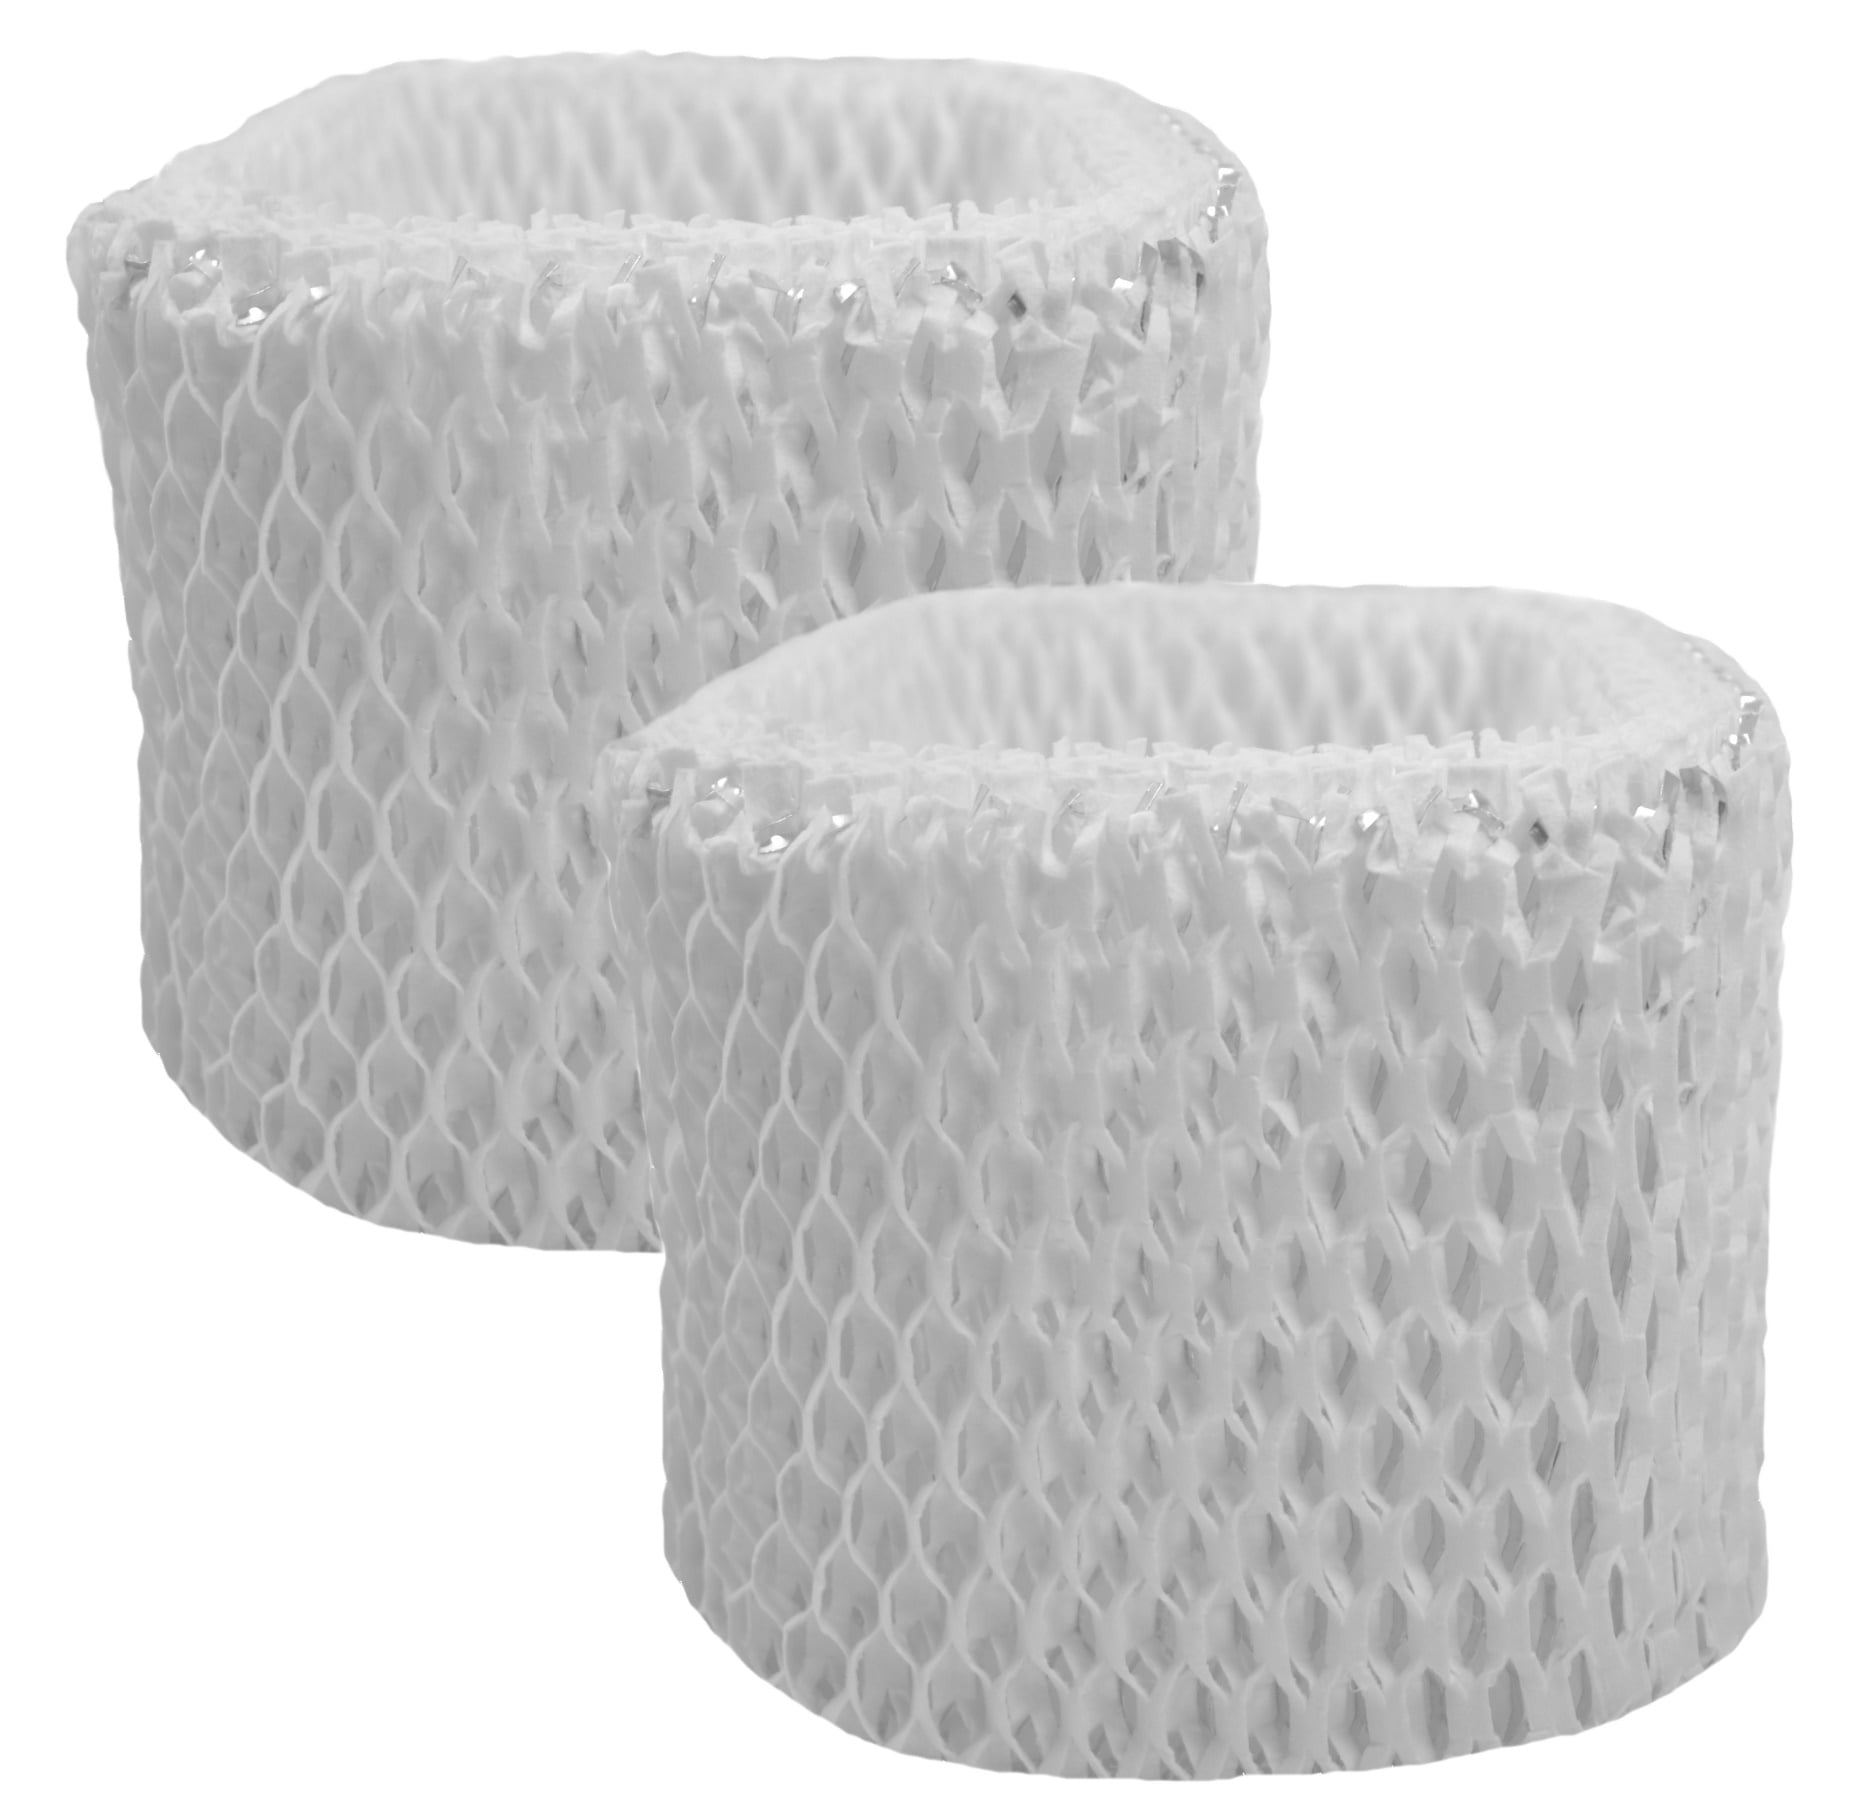 HWF62 Humidifier Filter Replacement For Holme Sunbeam Bionaire Honeywell 24x10cm 